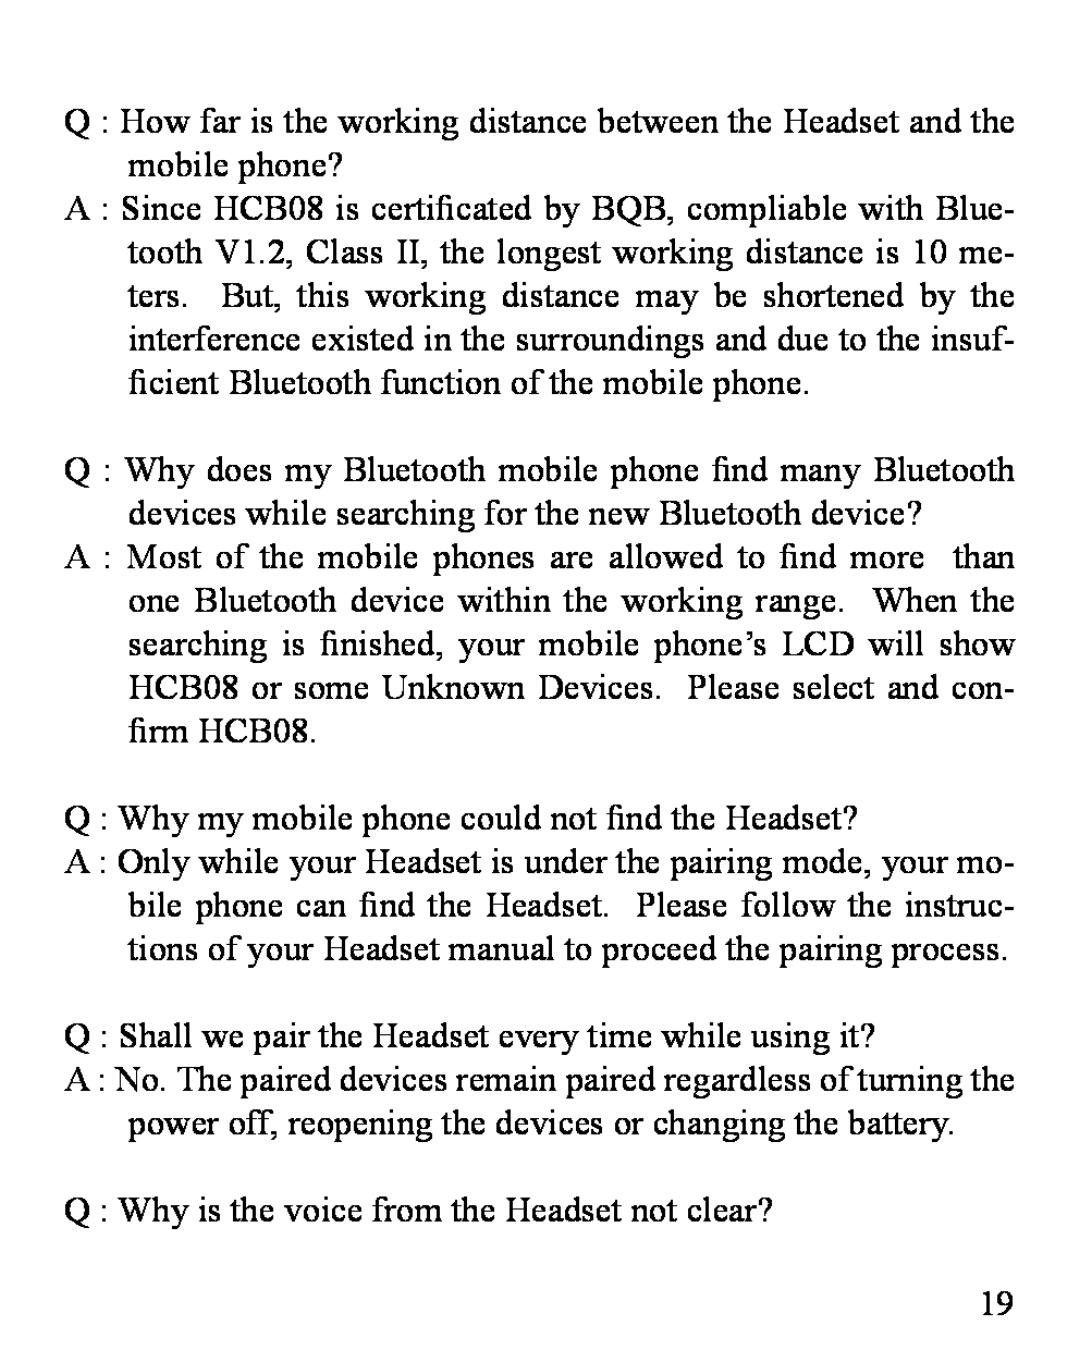 Huey Chiao HCB08 manual Q Why is the voice from the Headset not clear? 